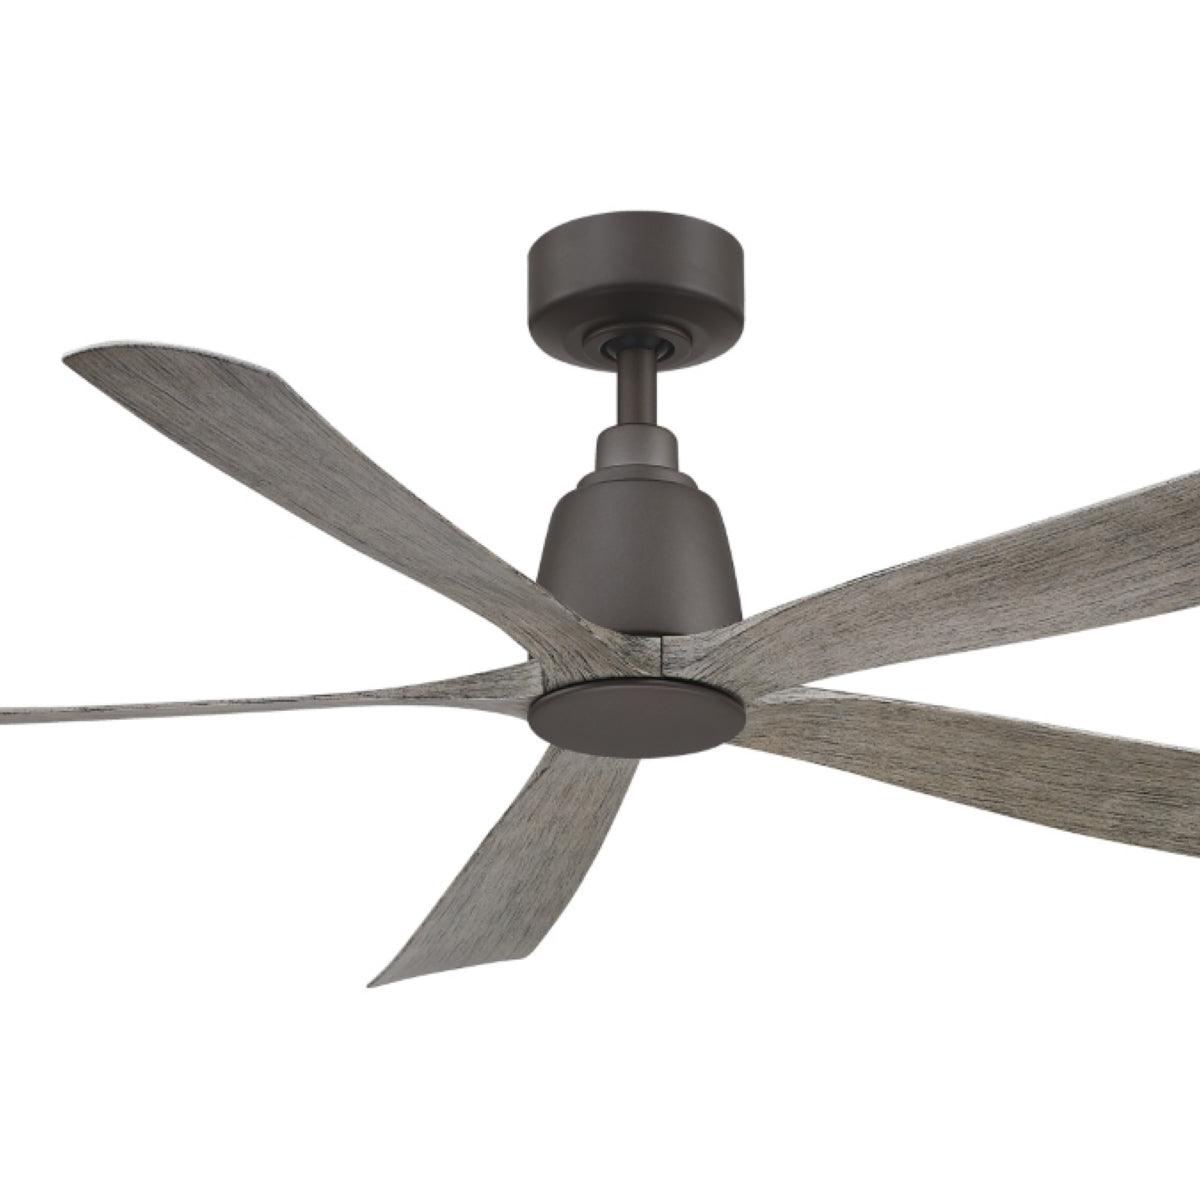 Kute5 52 Inch 5 Blades Indoor/Outdoor Ceiling Fan With Remote, Matte Greige with Weathered Wood Blades - Bees Lighting